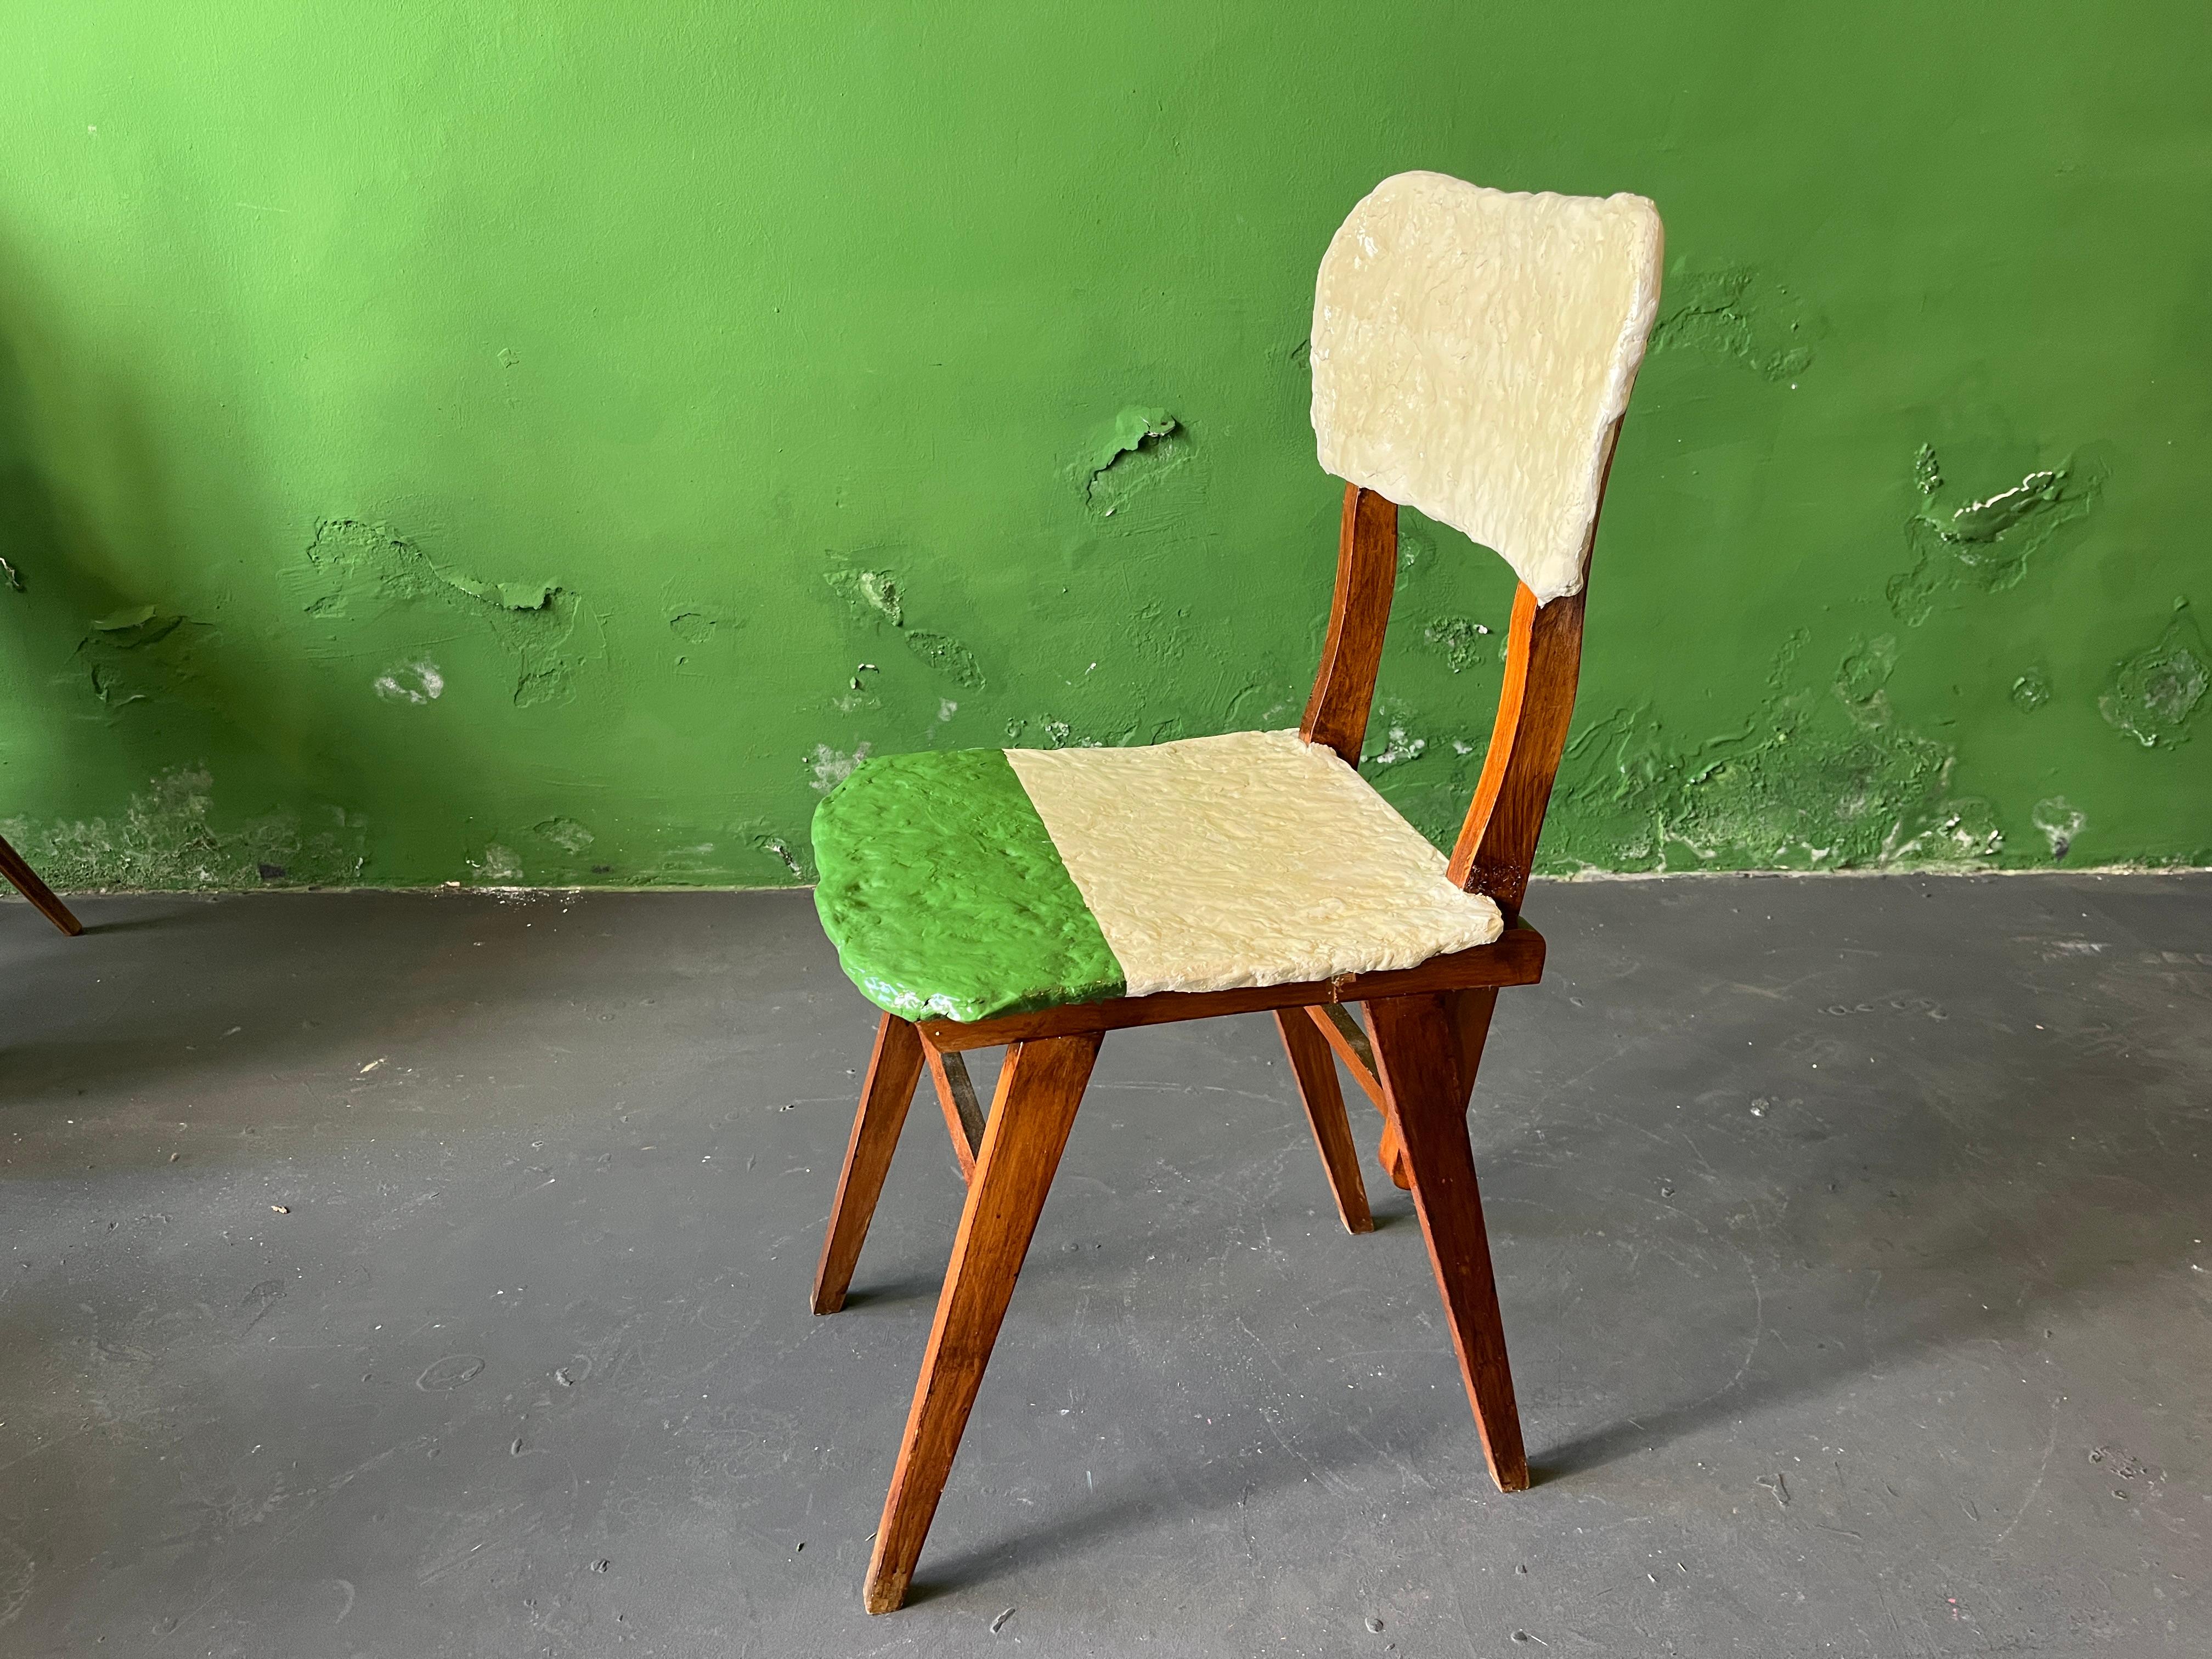 Greek Pilion Chair, Ceramic Seat and Backrest by Markus Friedrich Staab For Sale